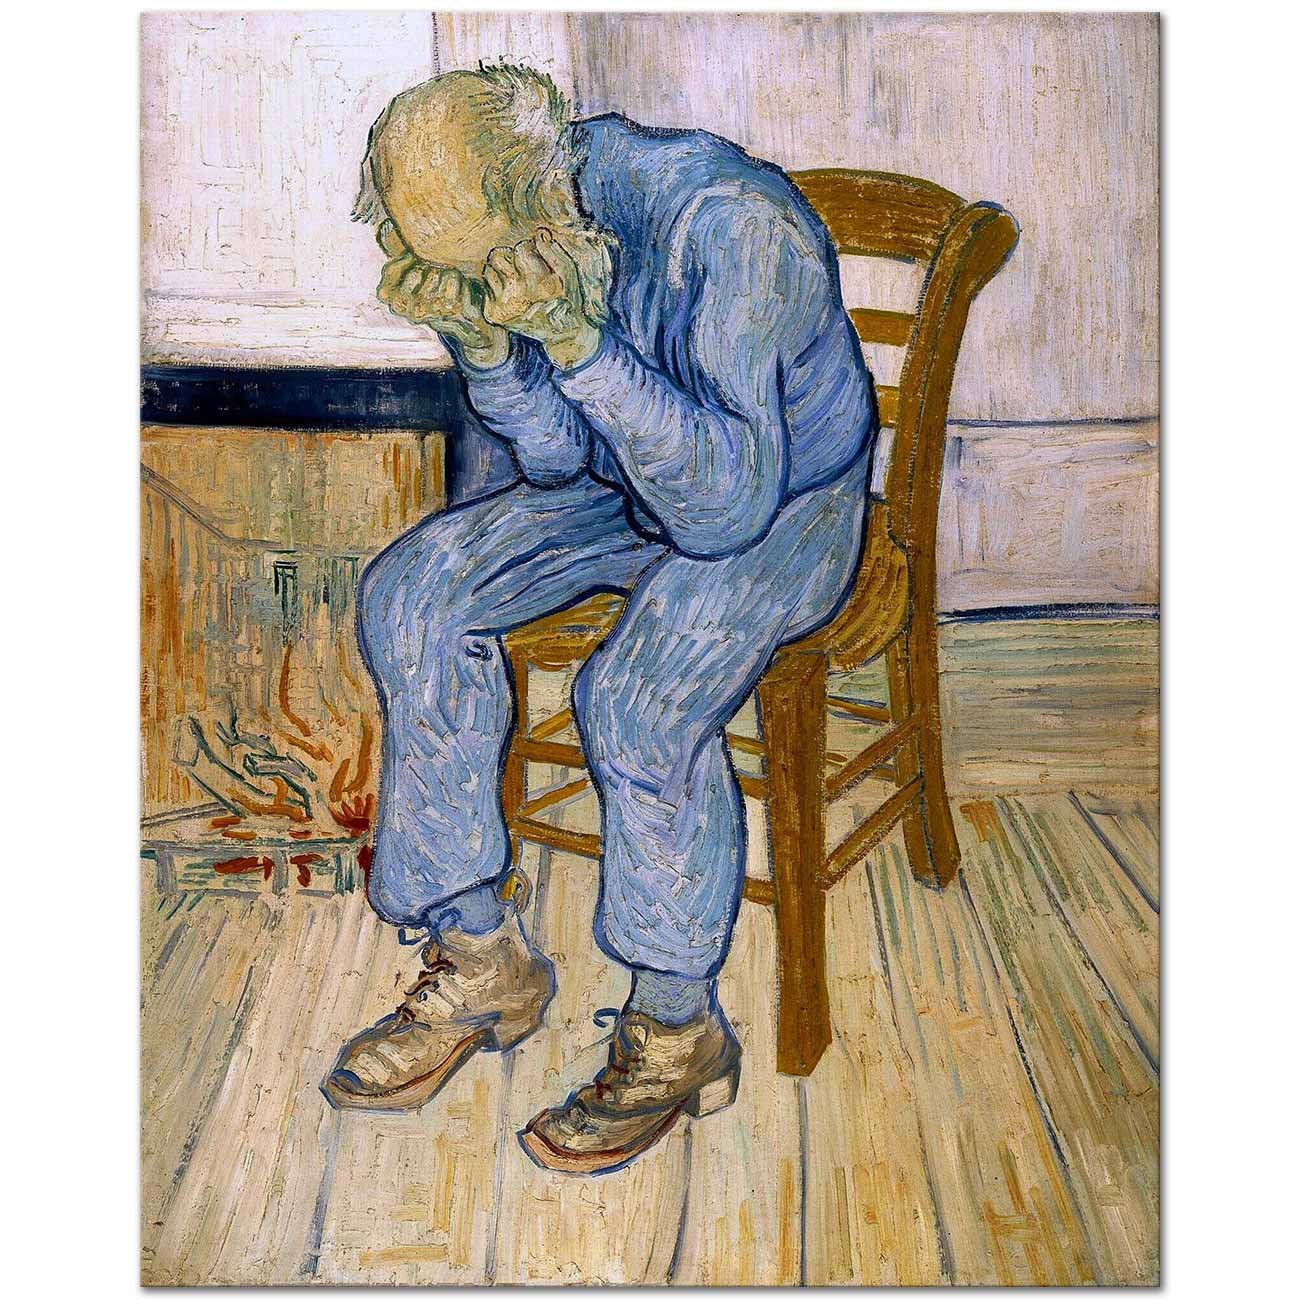 At Eternity's Gate by Vincent van Gogh as an Art Print